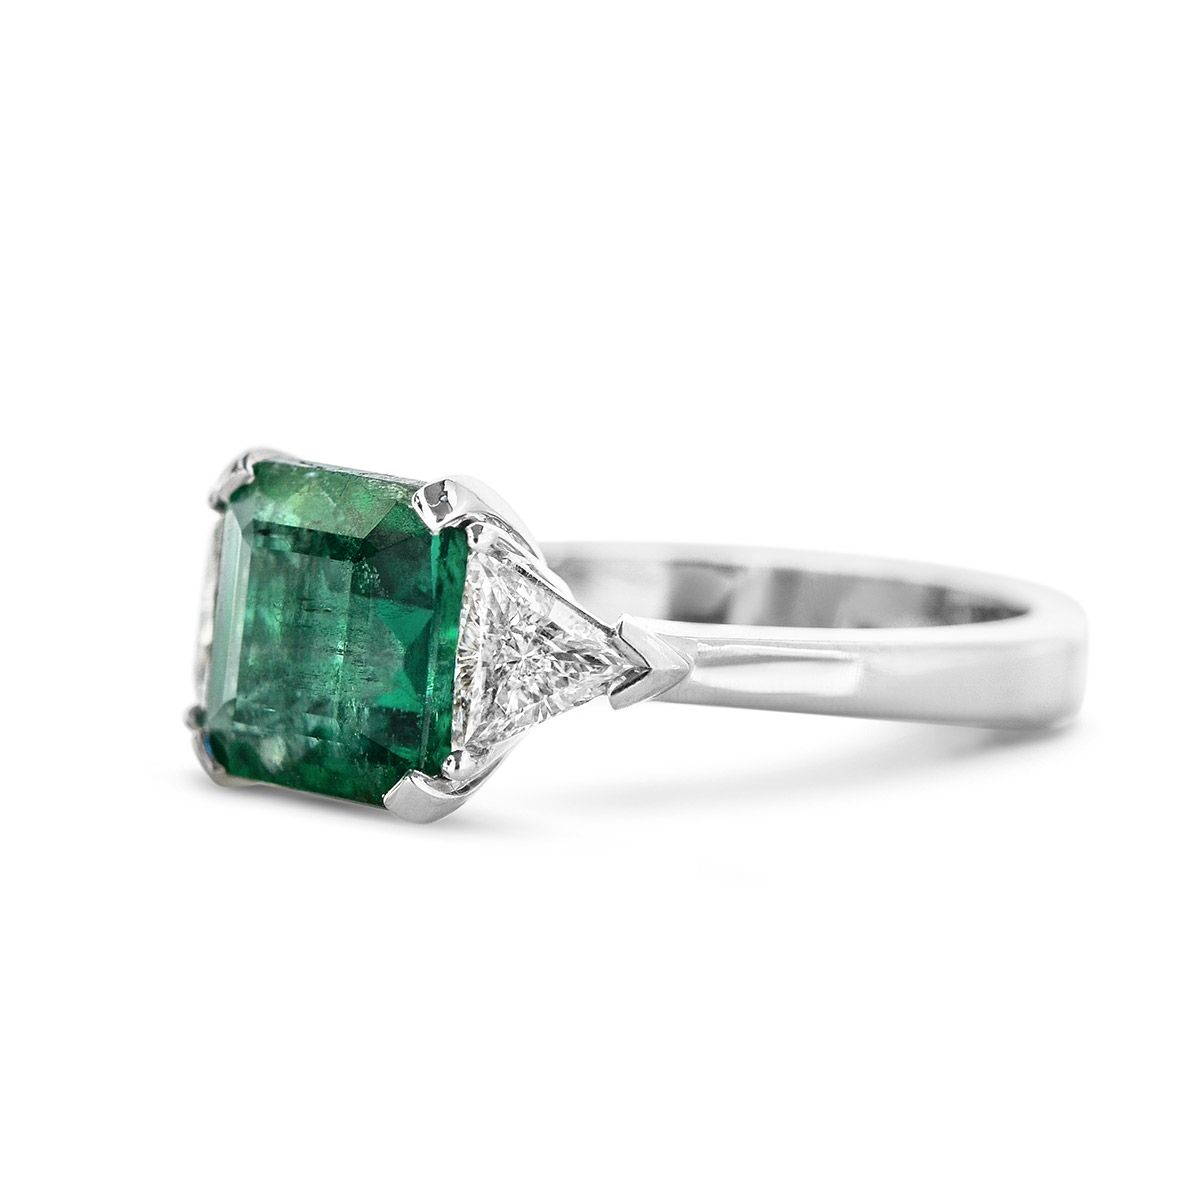 Natural Green Emerald Ring, 2.05 Ct. (2.47 Ct. TW), EG_Lab Certified, J5826189241, Unheated